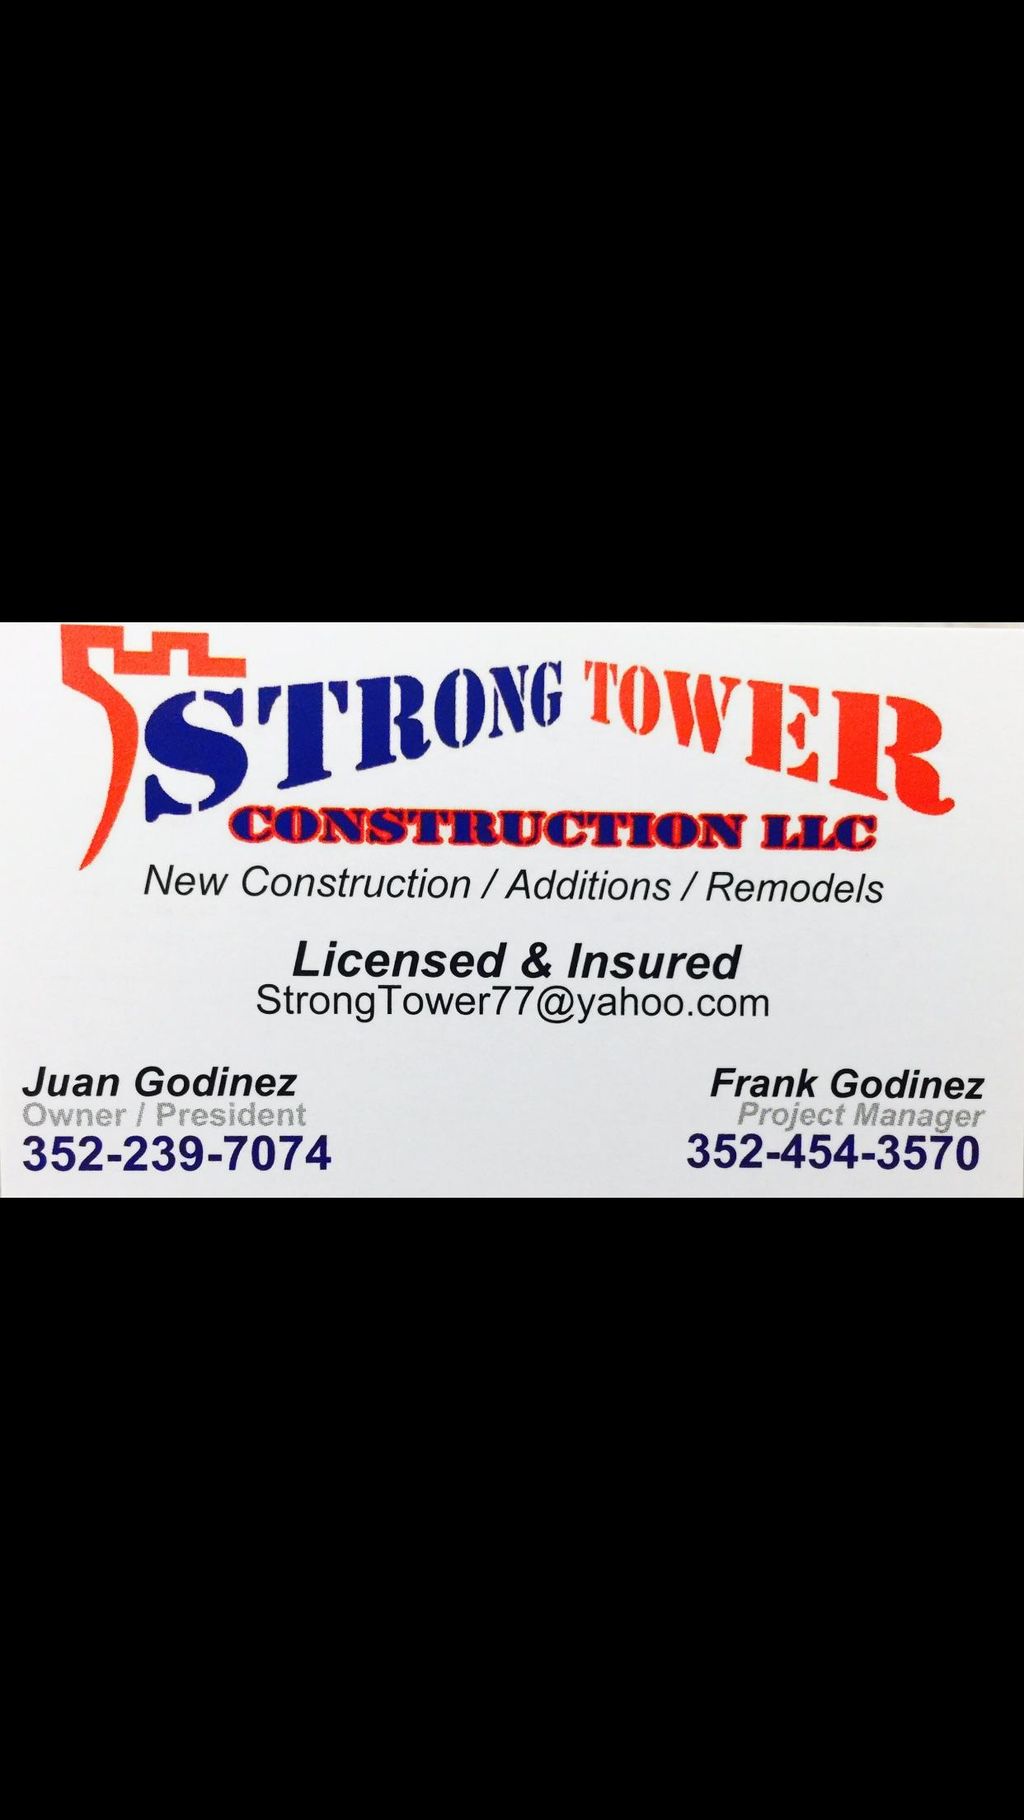 StrongTower Construction & Remodeling